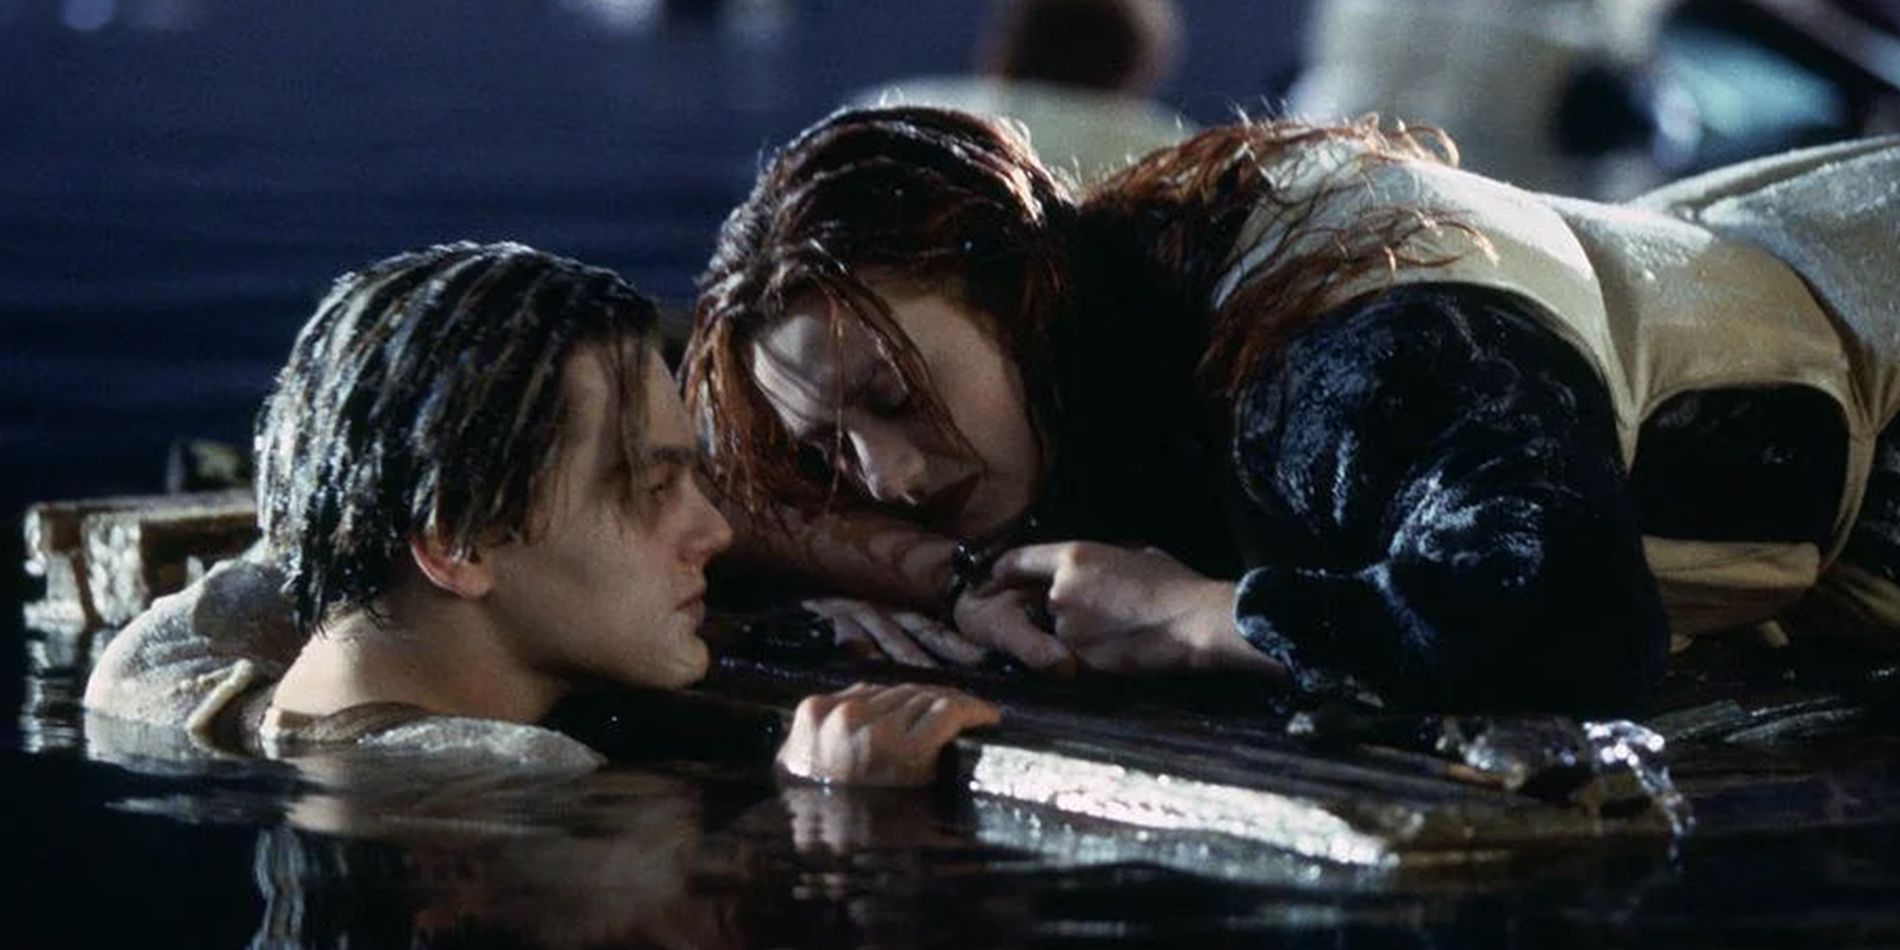 Jack and Rose played by Leonardo DiCaprio and Kate Winslet in Titanic at the board holding hands